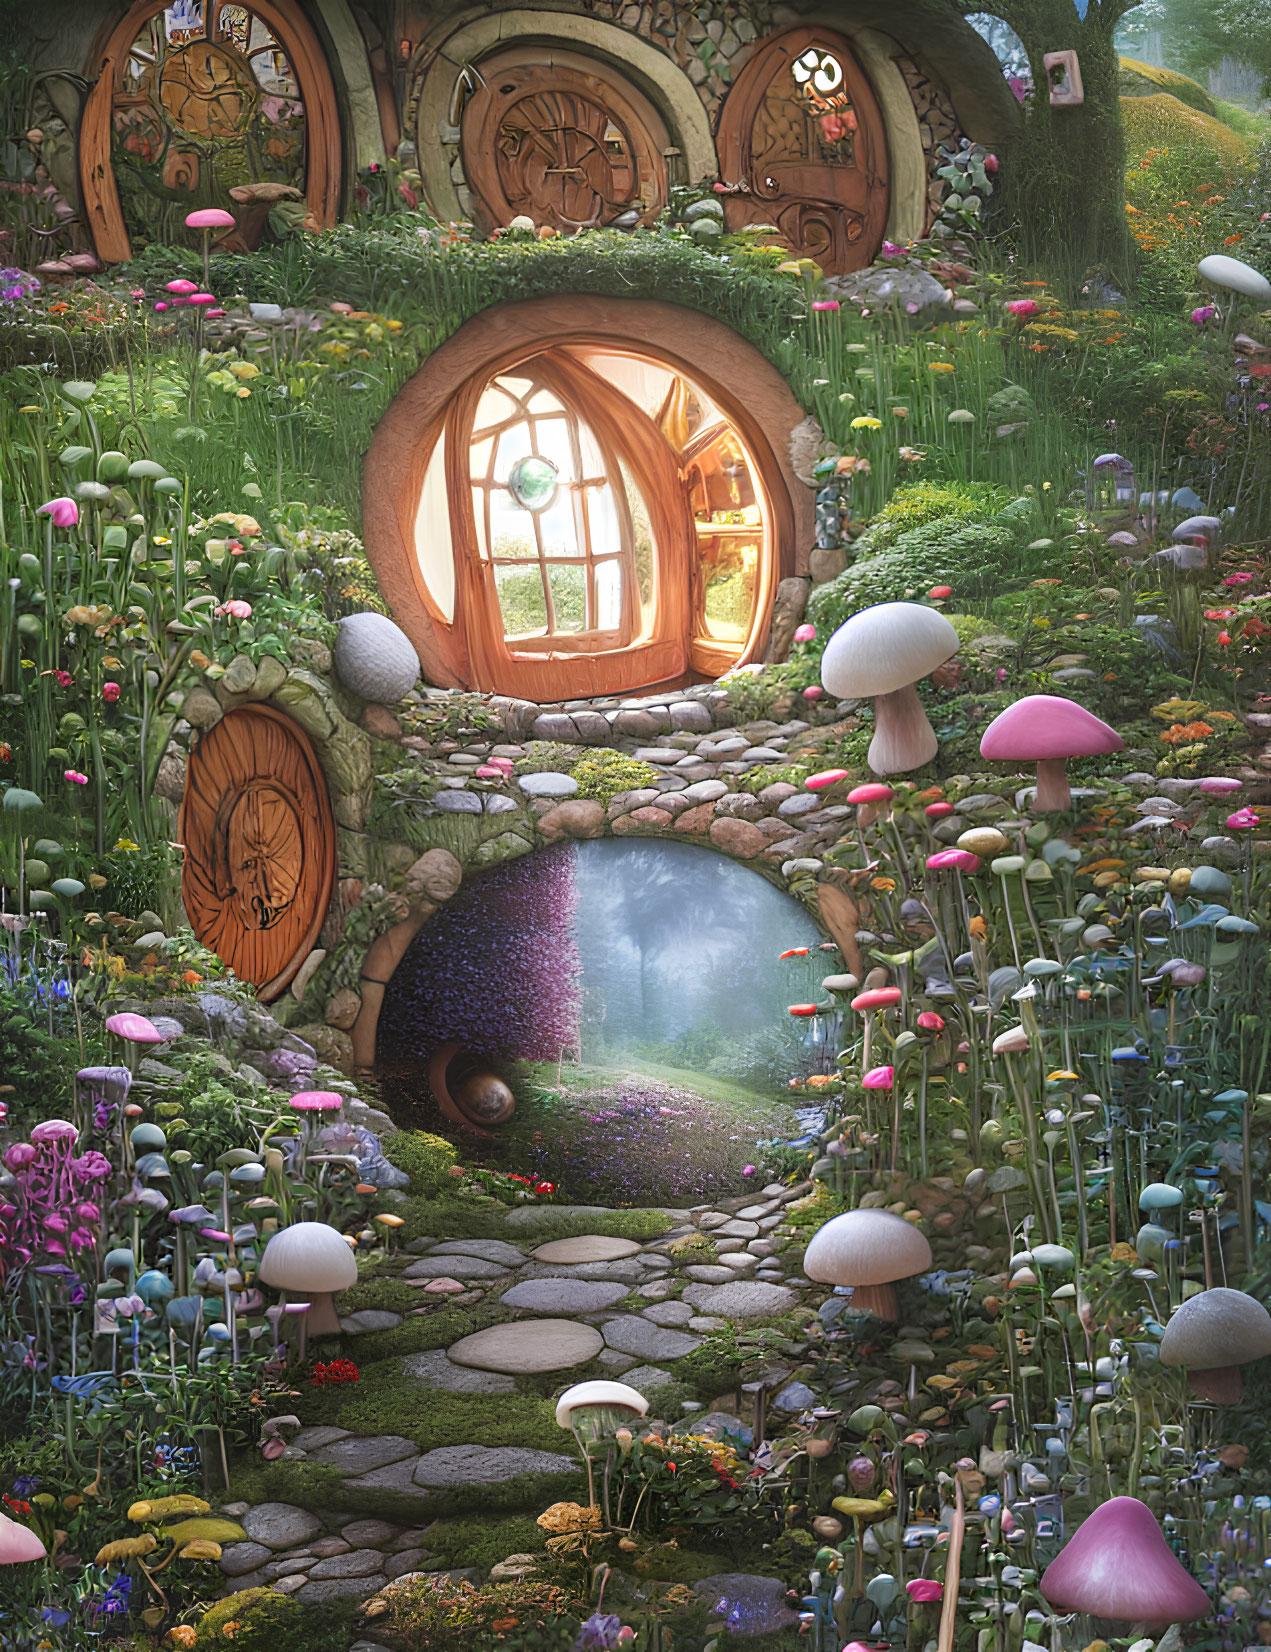 Enchanting fairy-tale cottage with round doors and magical garden